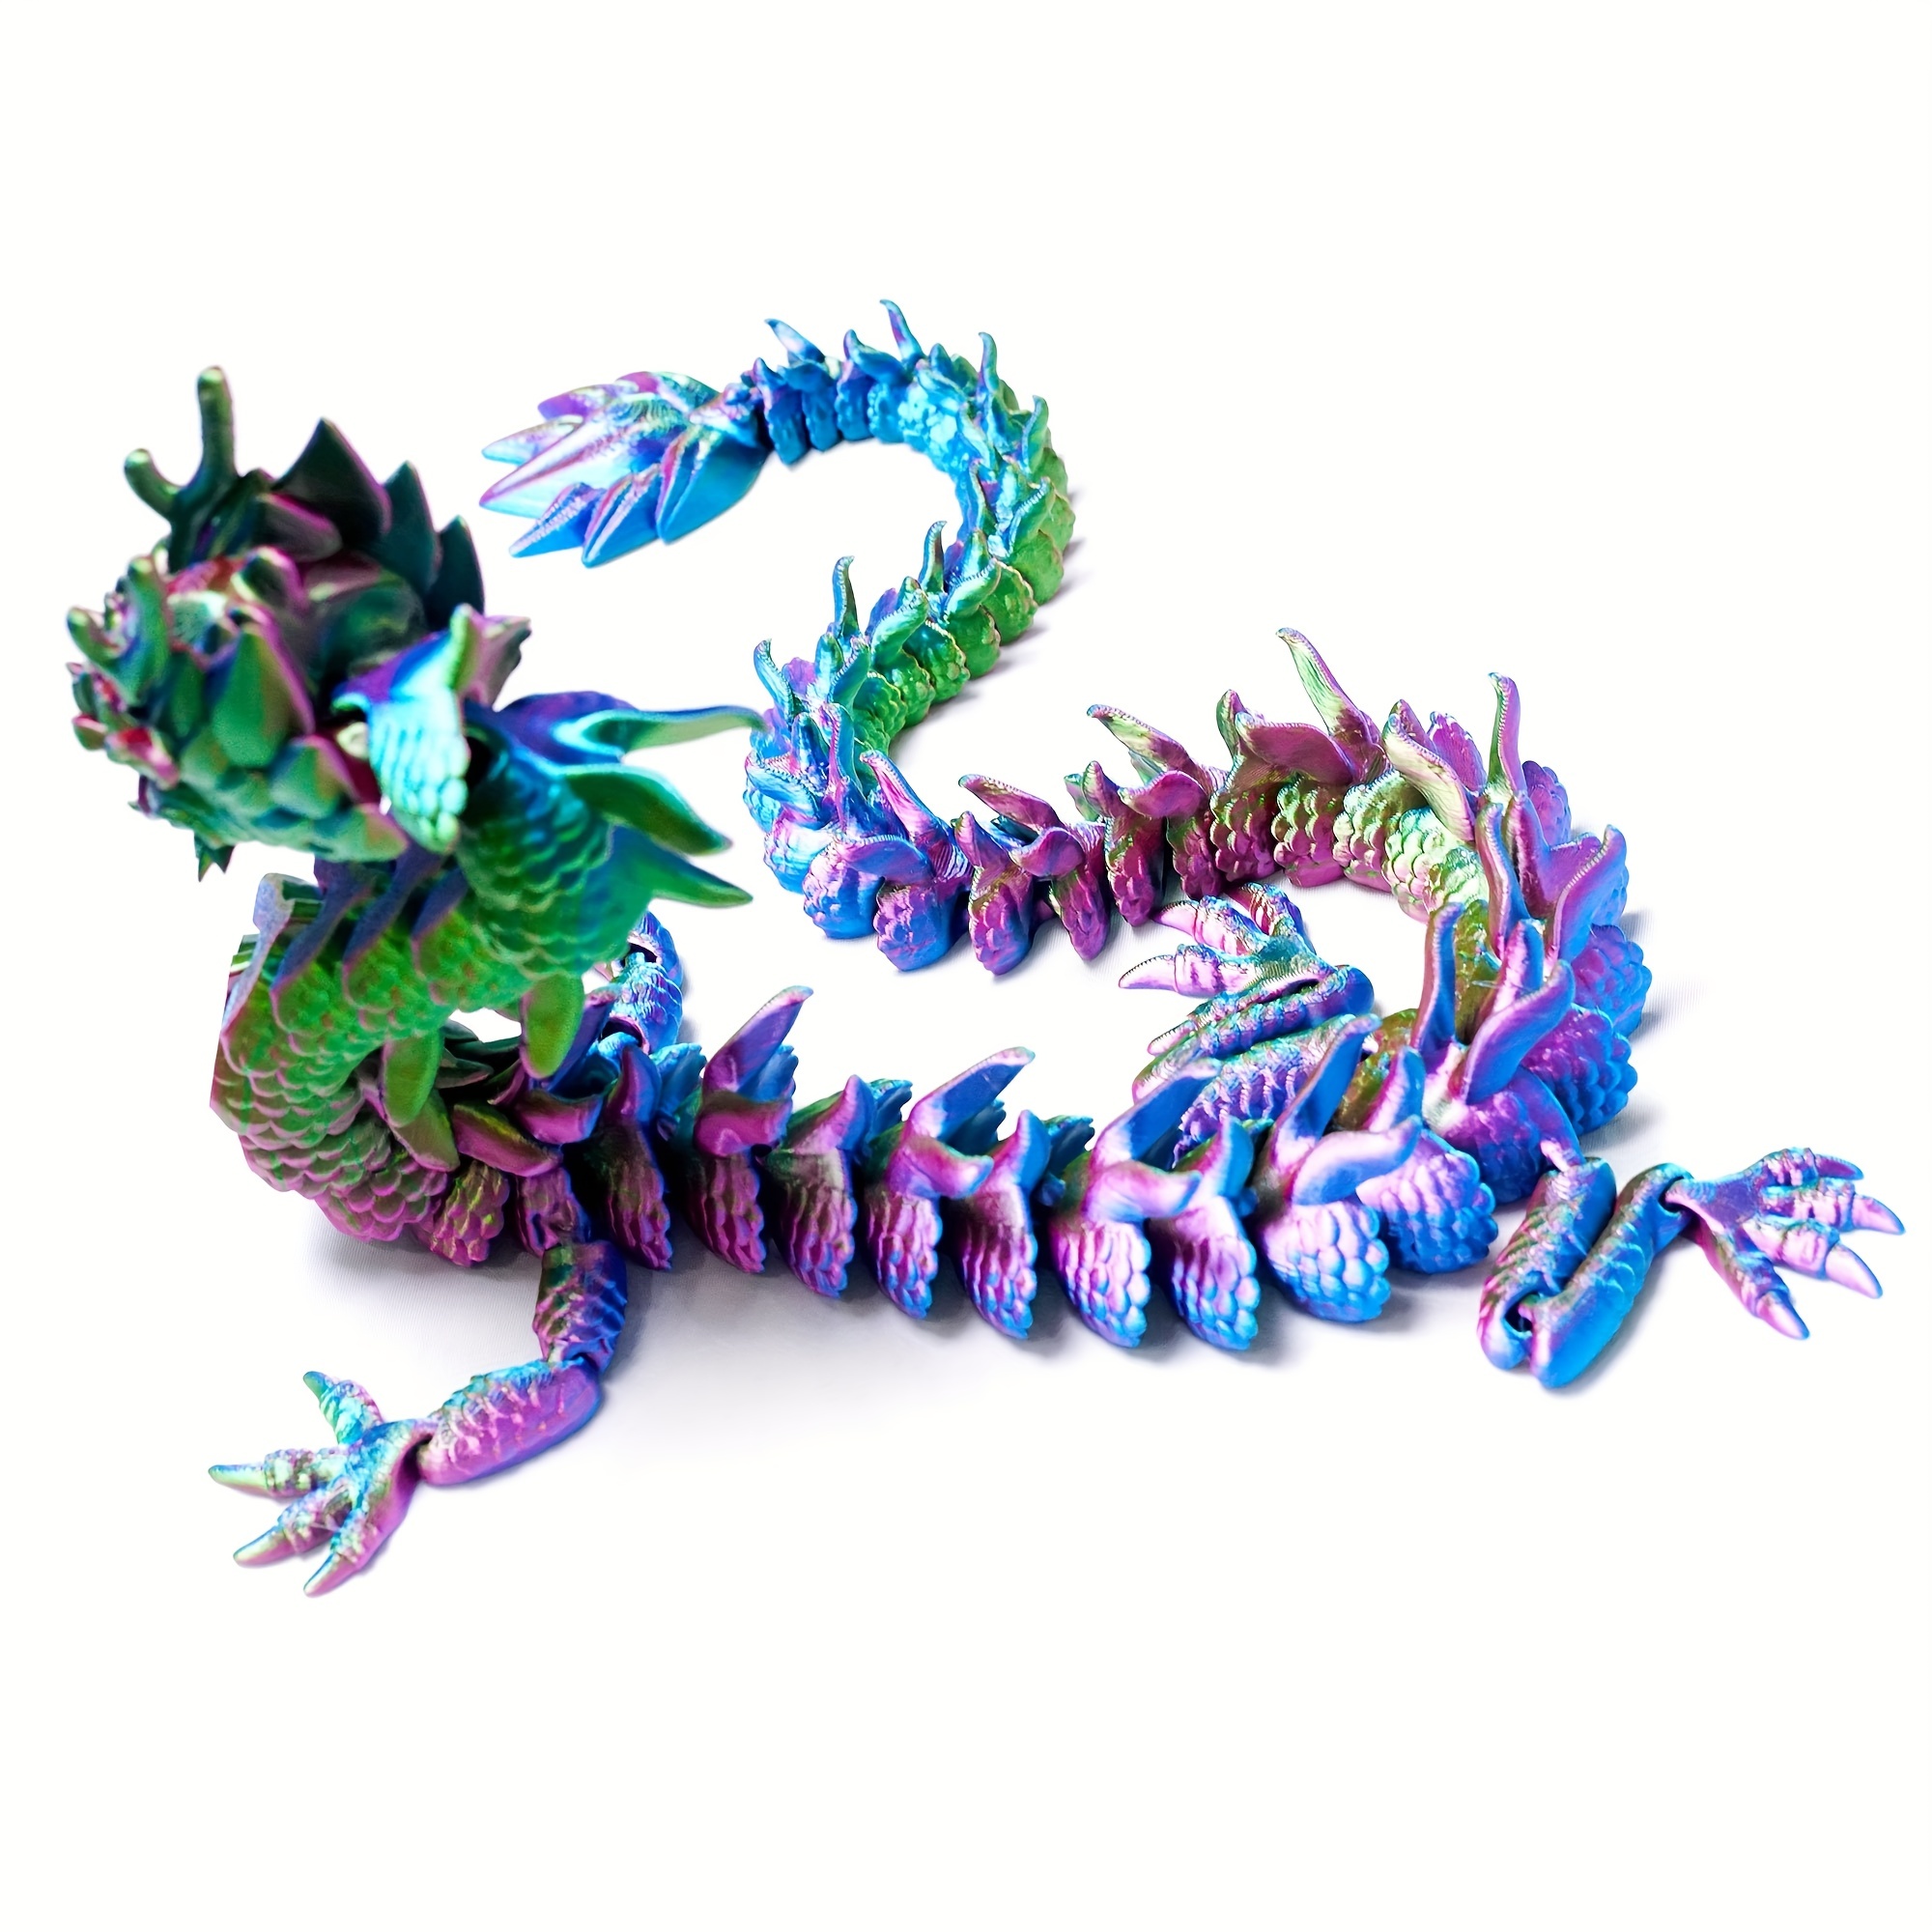 18.5 inch 3D Printed Articulated Dragon, Anti-Anxiety Dragon, 3D